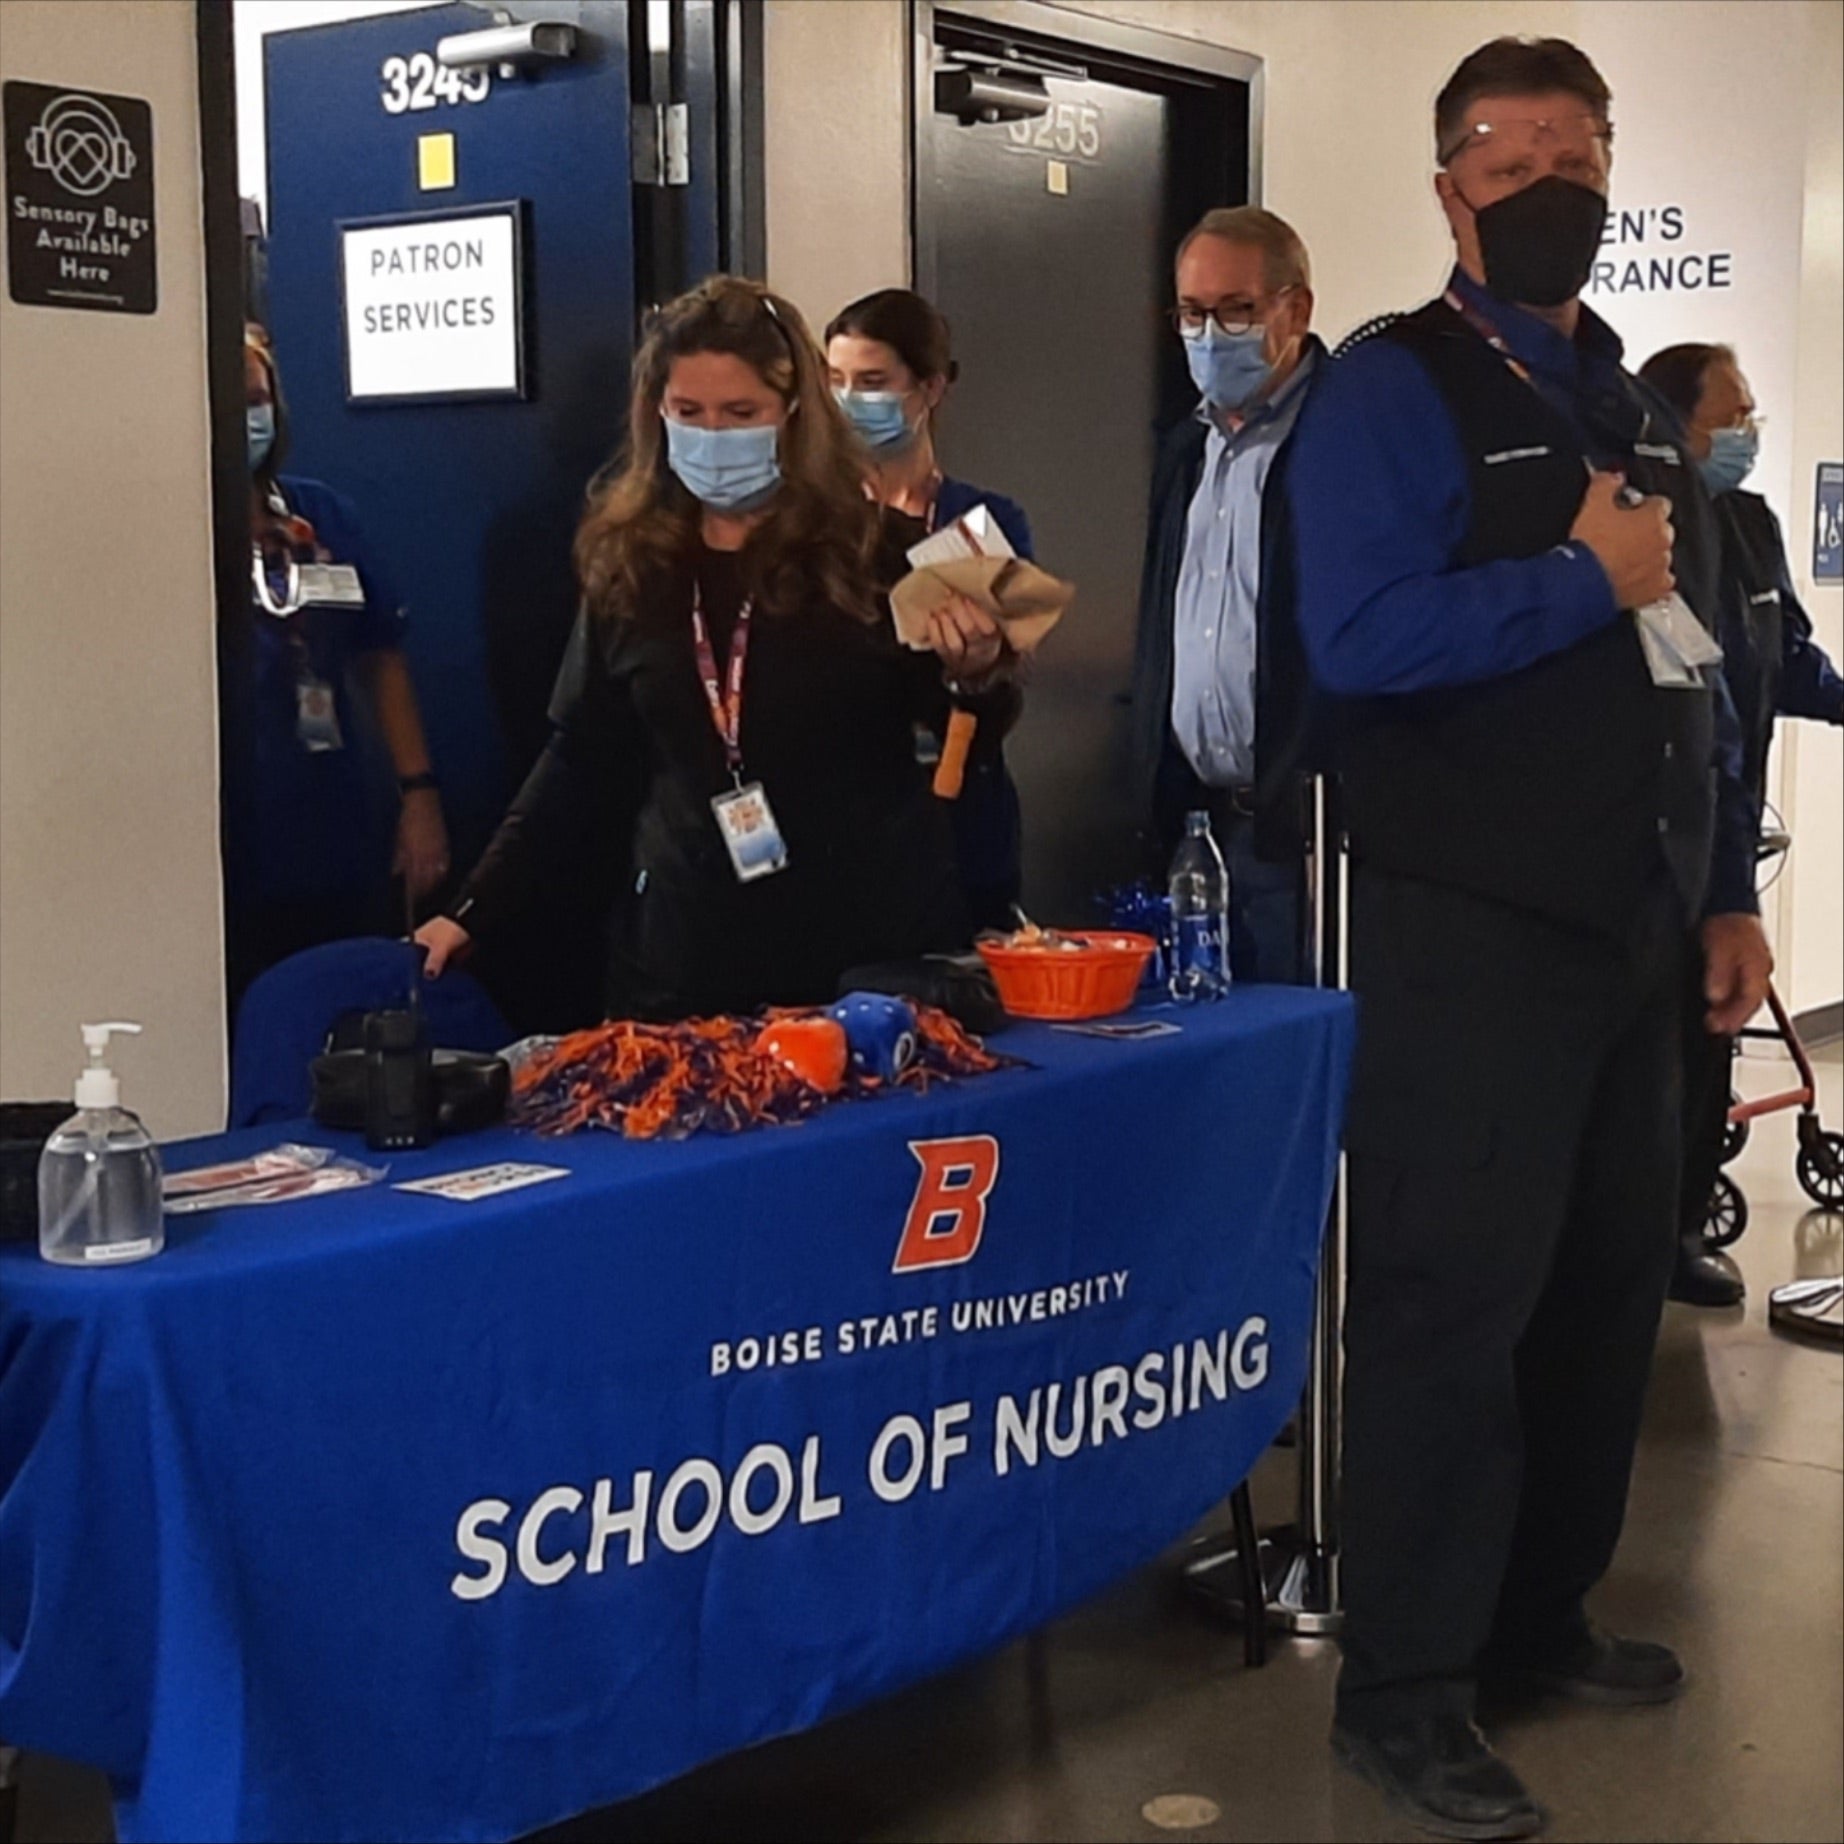 Boise State School of Nursing has partnered with ExtraMile Arena to provide First Aid support